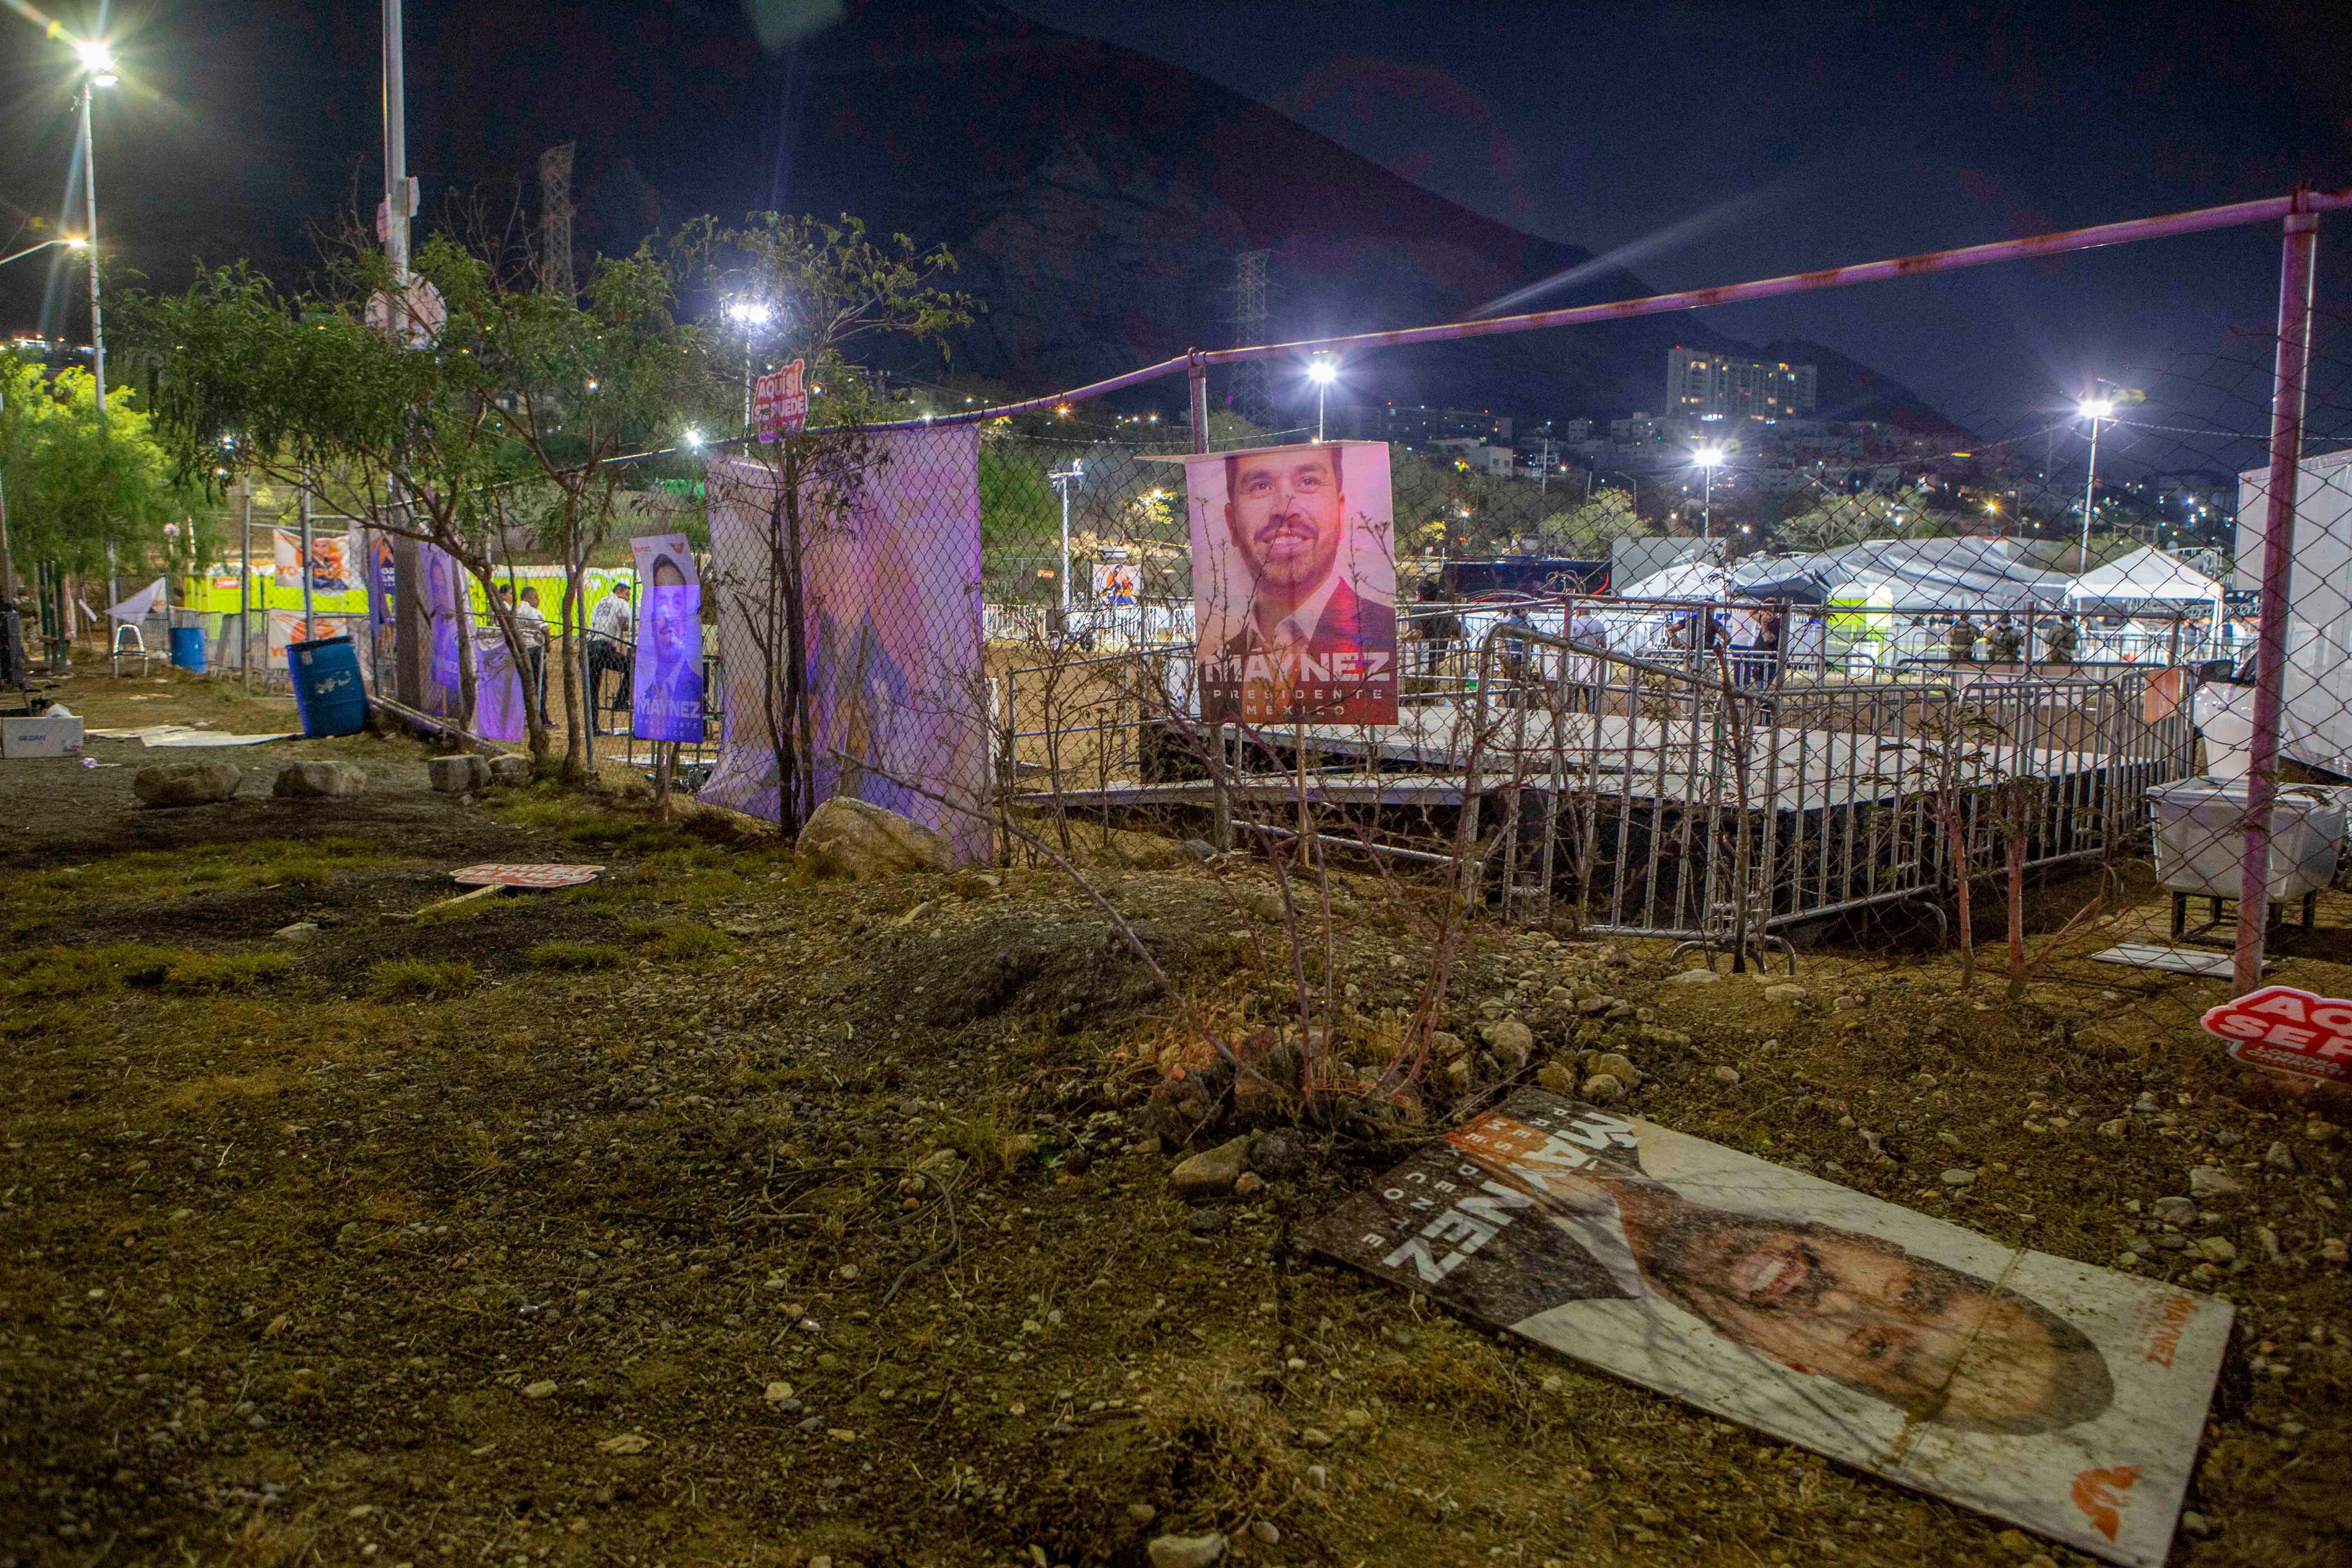 A campaign poster is seen on the ground after a stage collapsed during a campaign rally for Mexican presidential candidate Jorge Alvarez Maynez in San Pedro Garza Garcia, Nuevo Leon